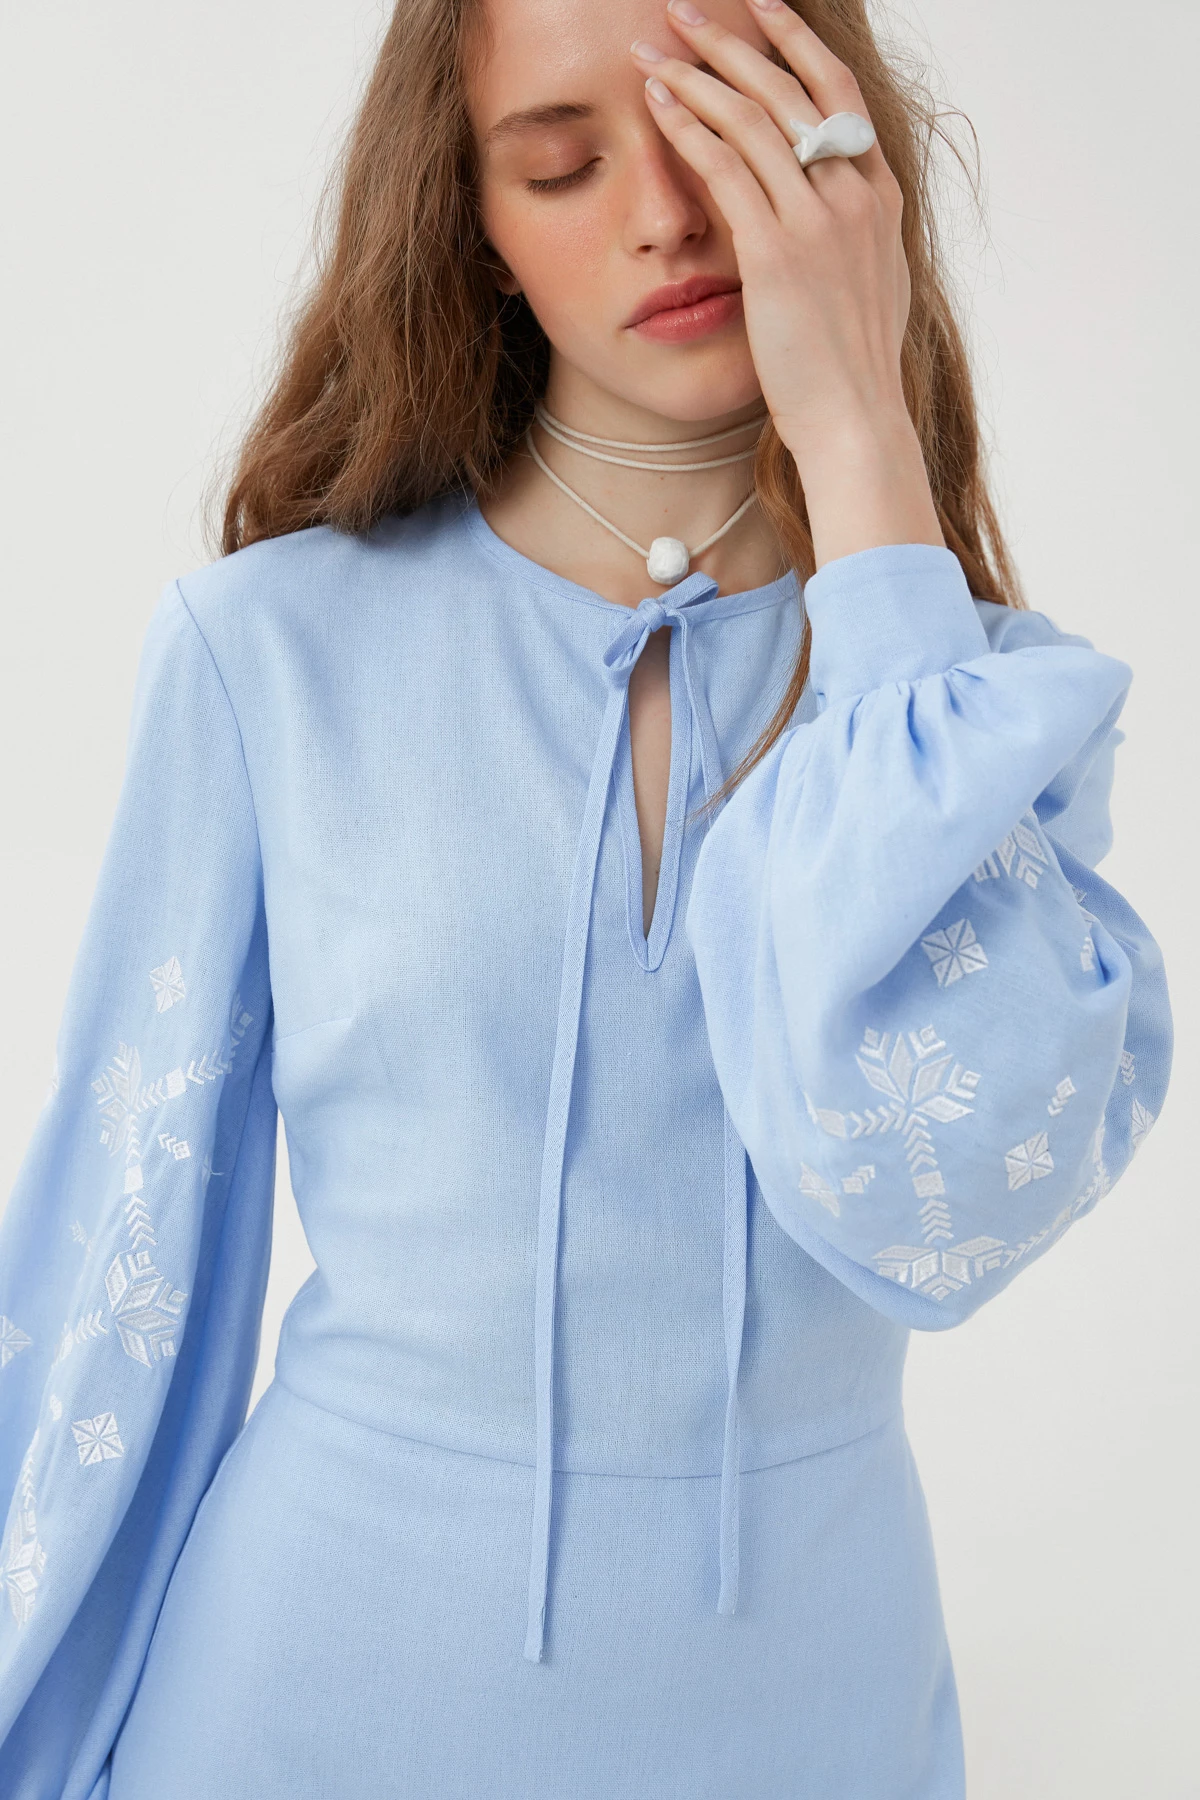 Embroidered short dress "Barvinok" with blue linen, photo 1